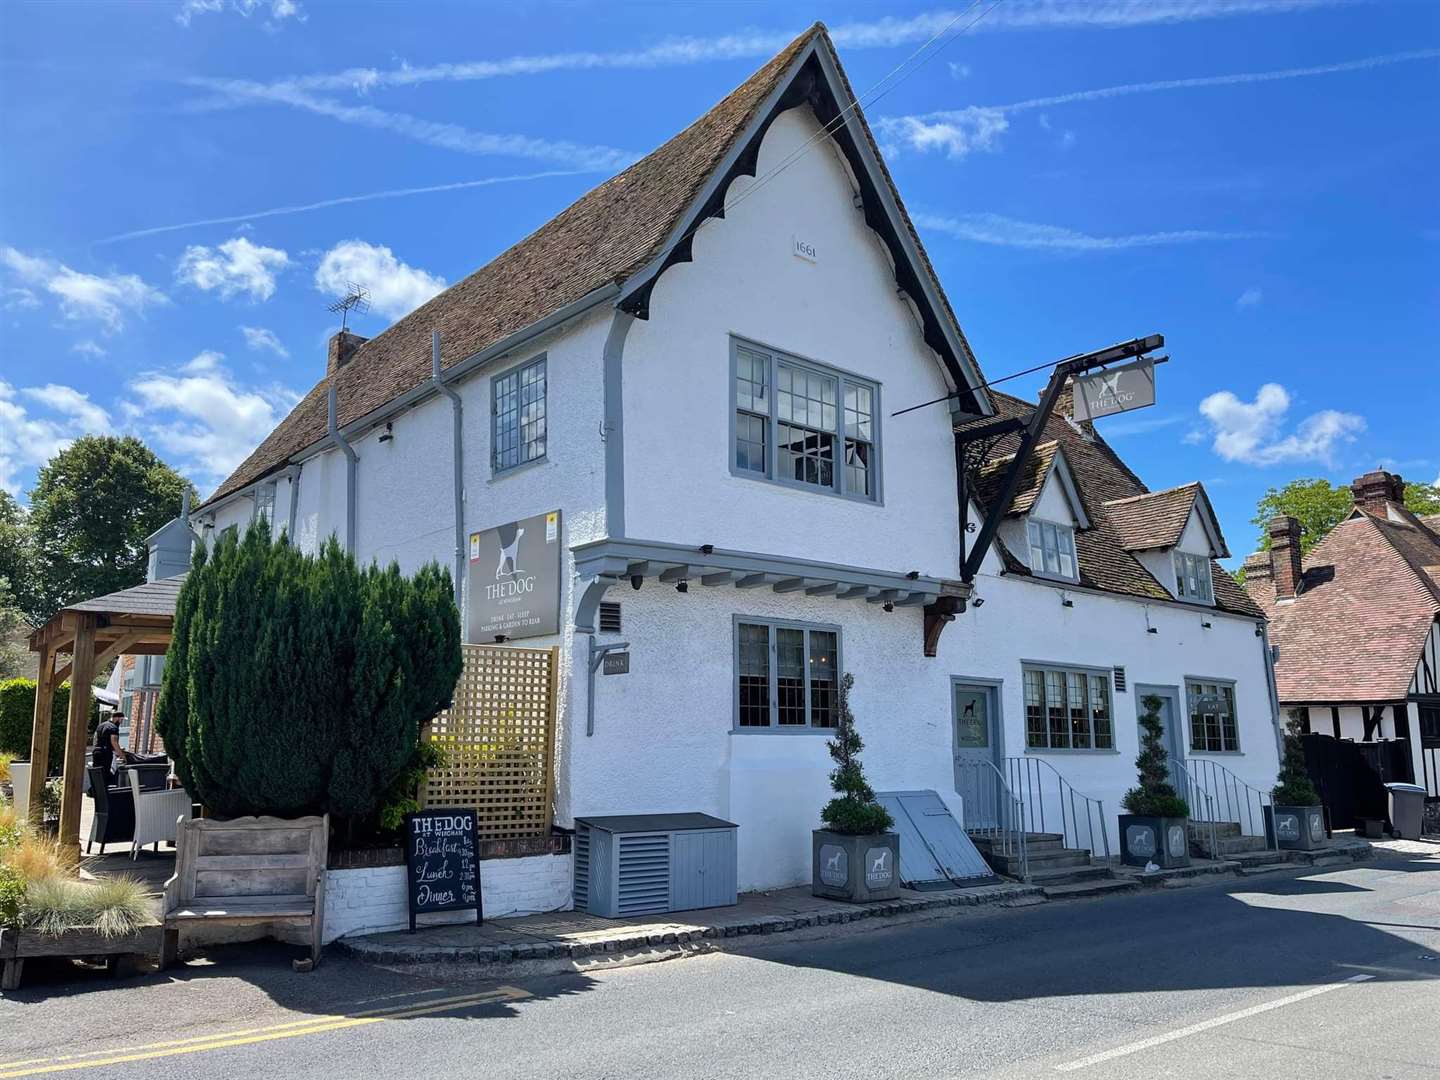 In addition to being honoured with a Tripadvisor Travellers' Choice award, The Dog at Wingham has received a Muddy Stilettos award for Best Boutique Stay